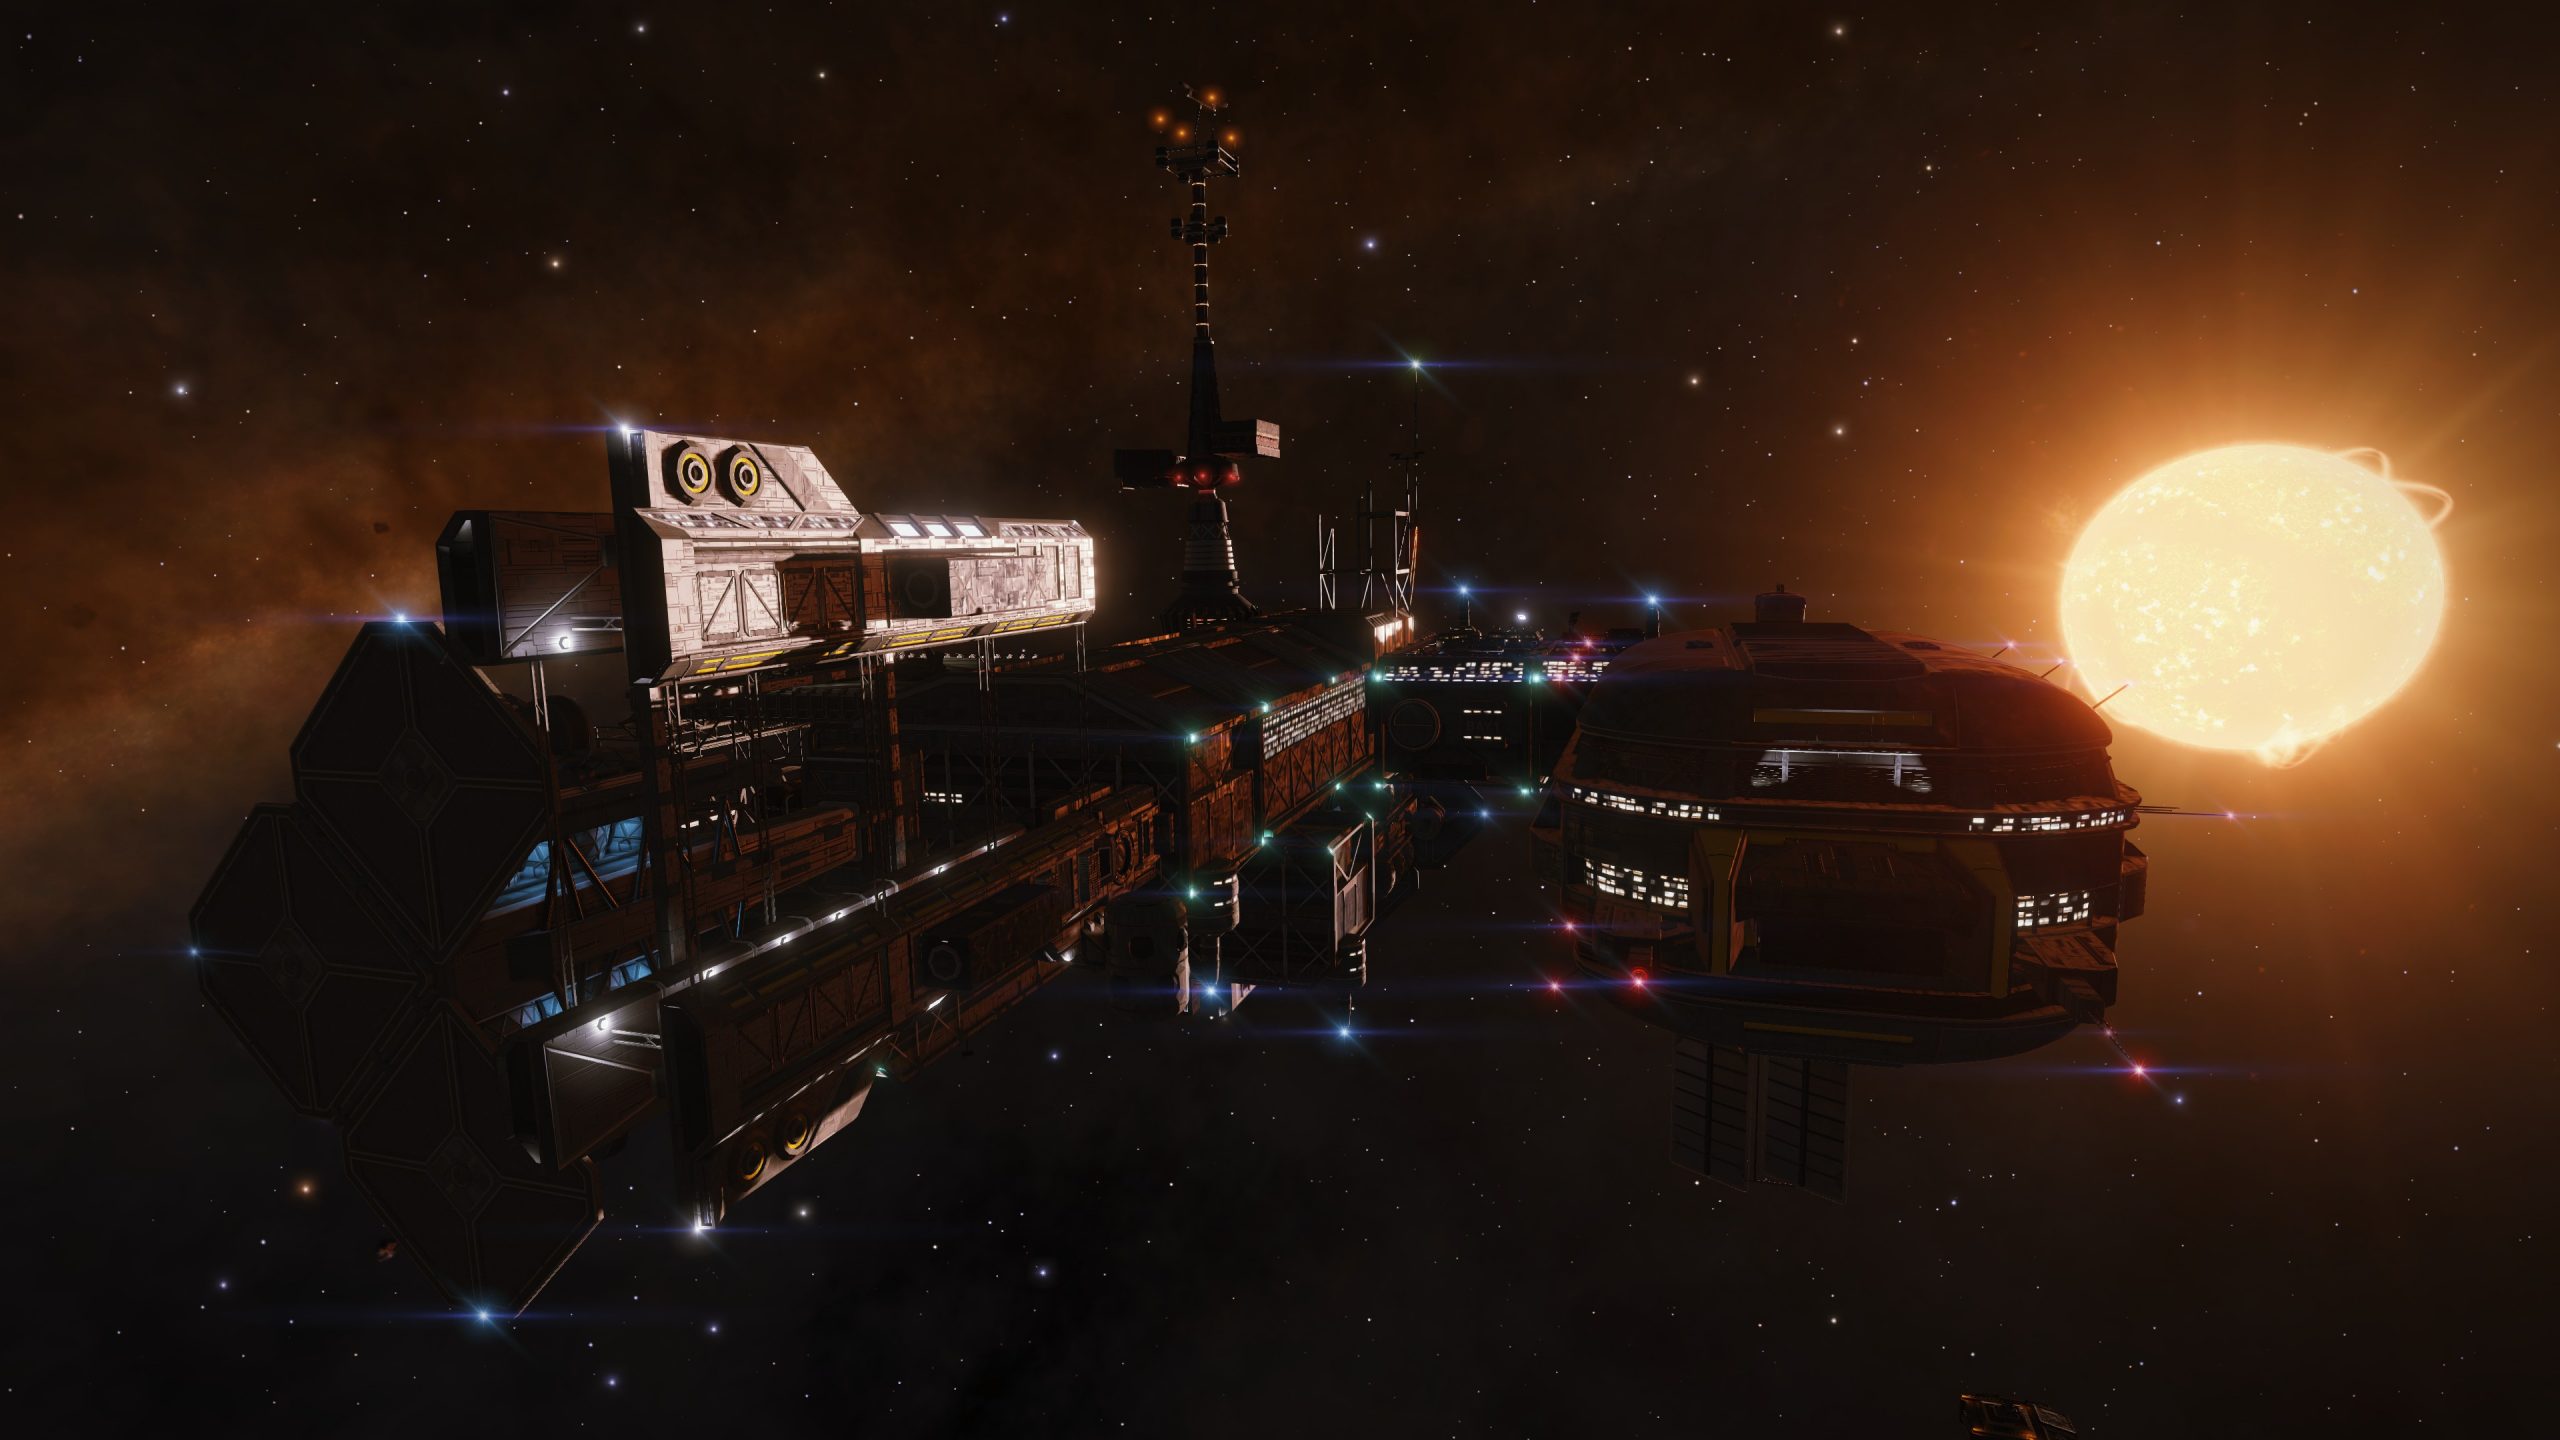 Dictator deploys military to quell unrest at Industrial Facility, Federation steps in.